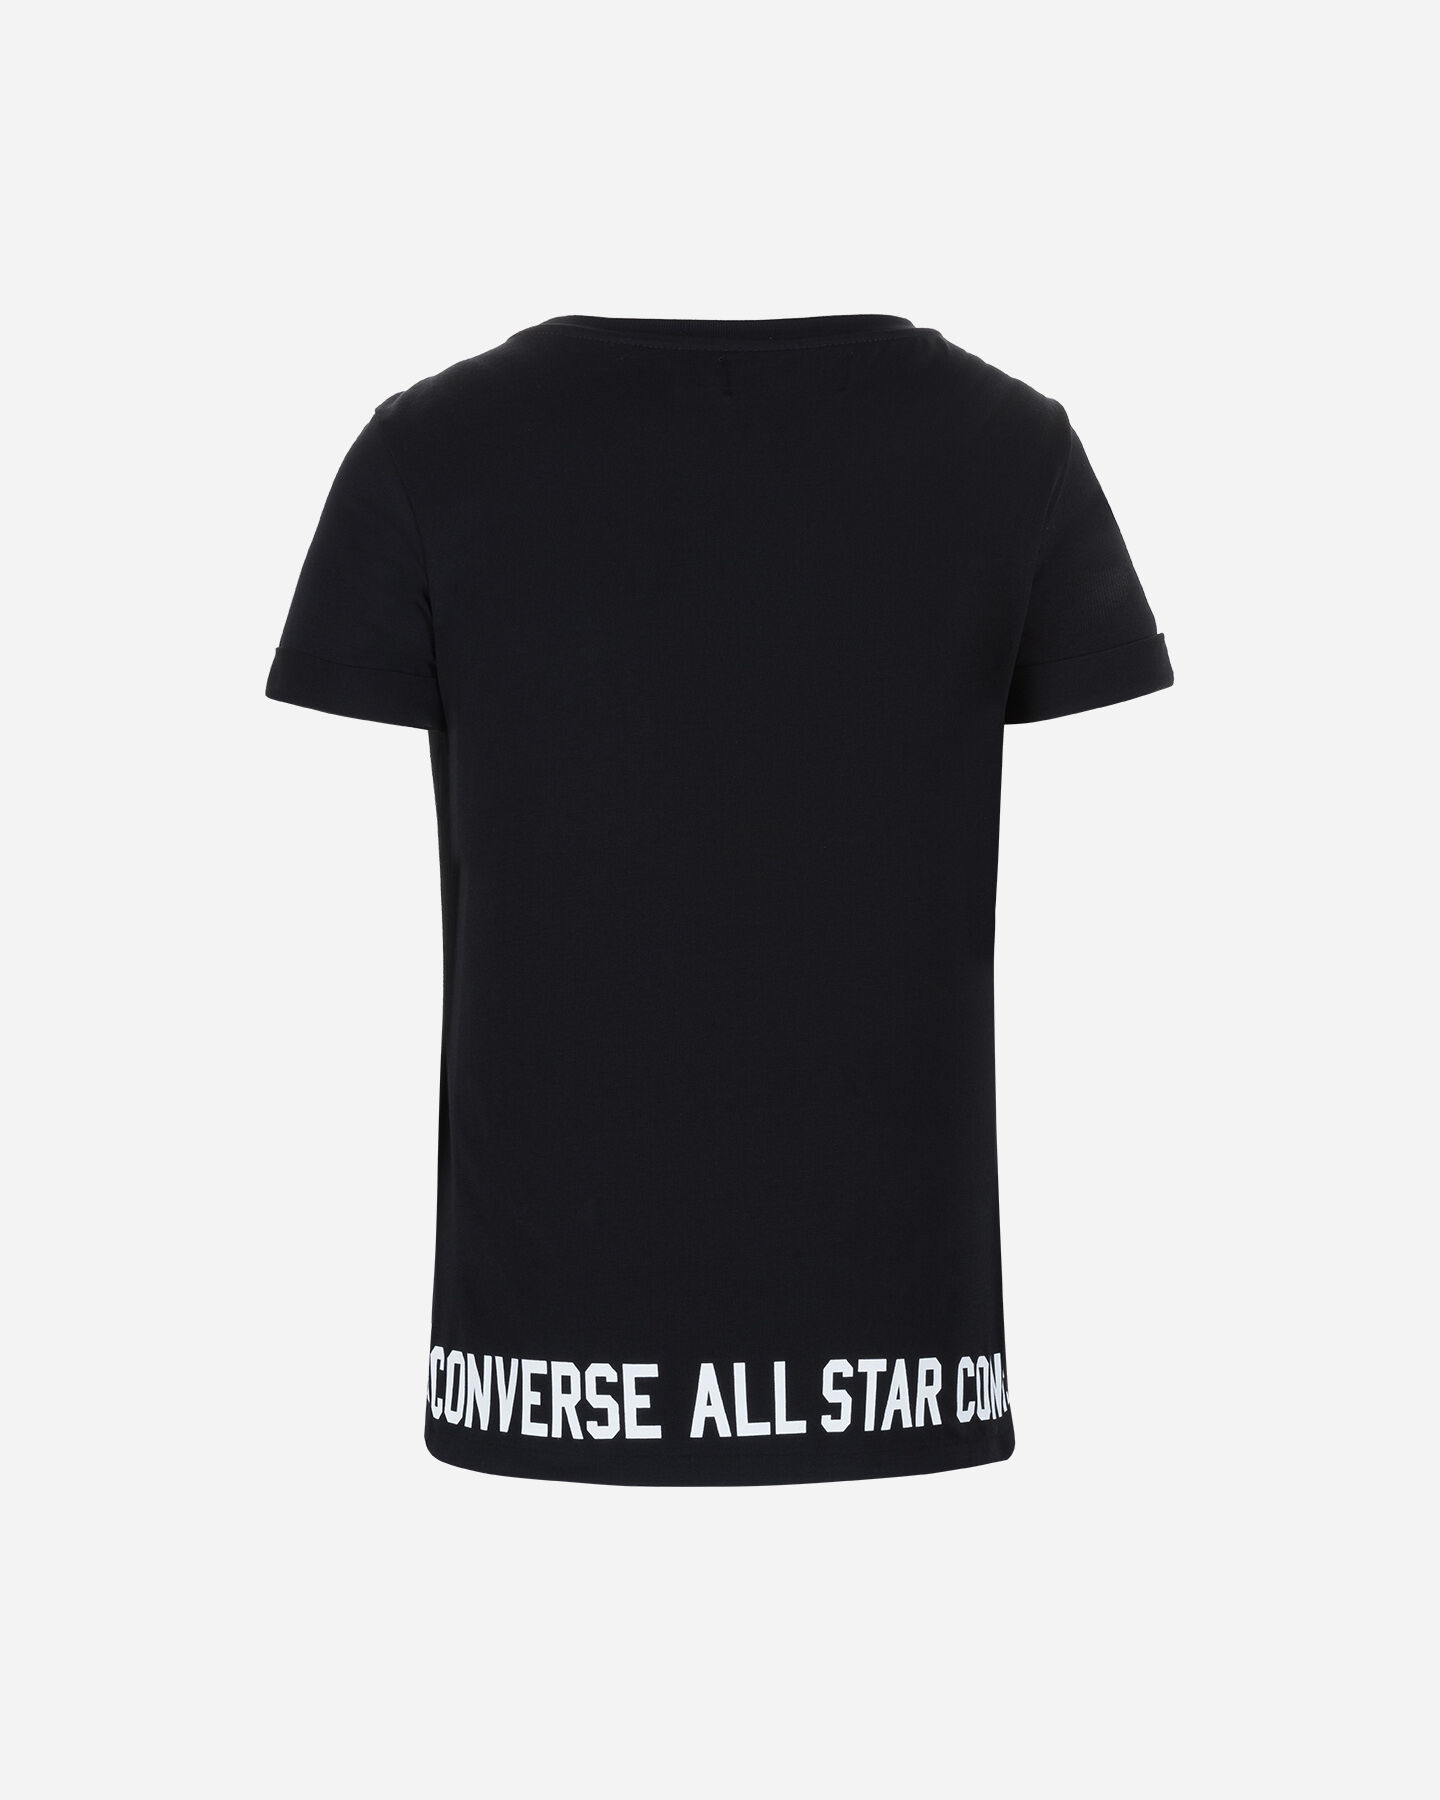  T-Shirt CONVERSE LOGO ROLL UP W S5181172|001|L scatto 1